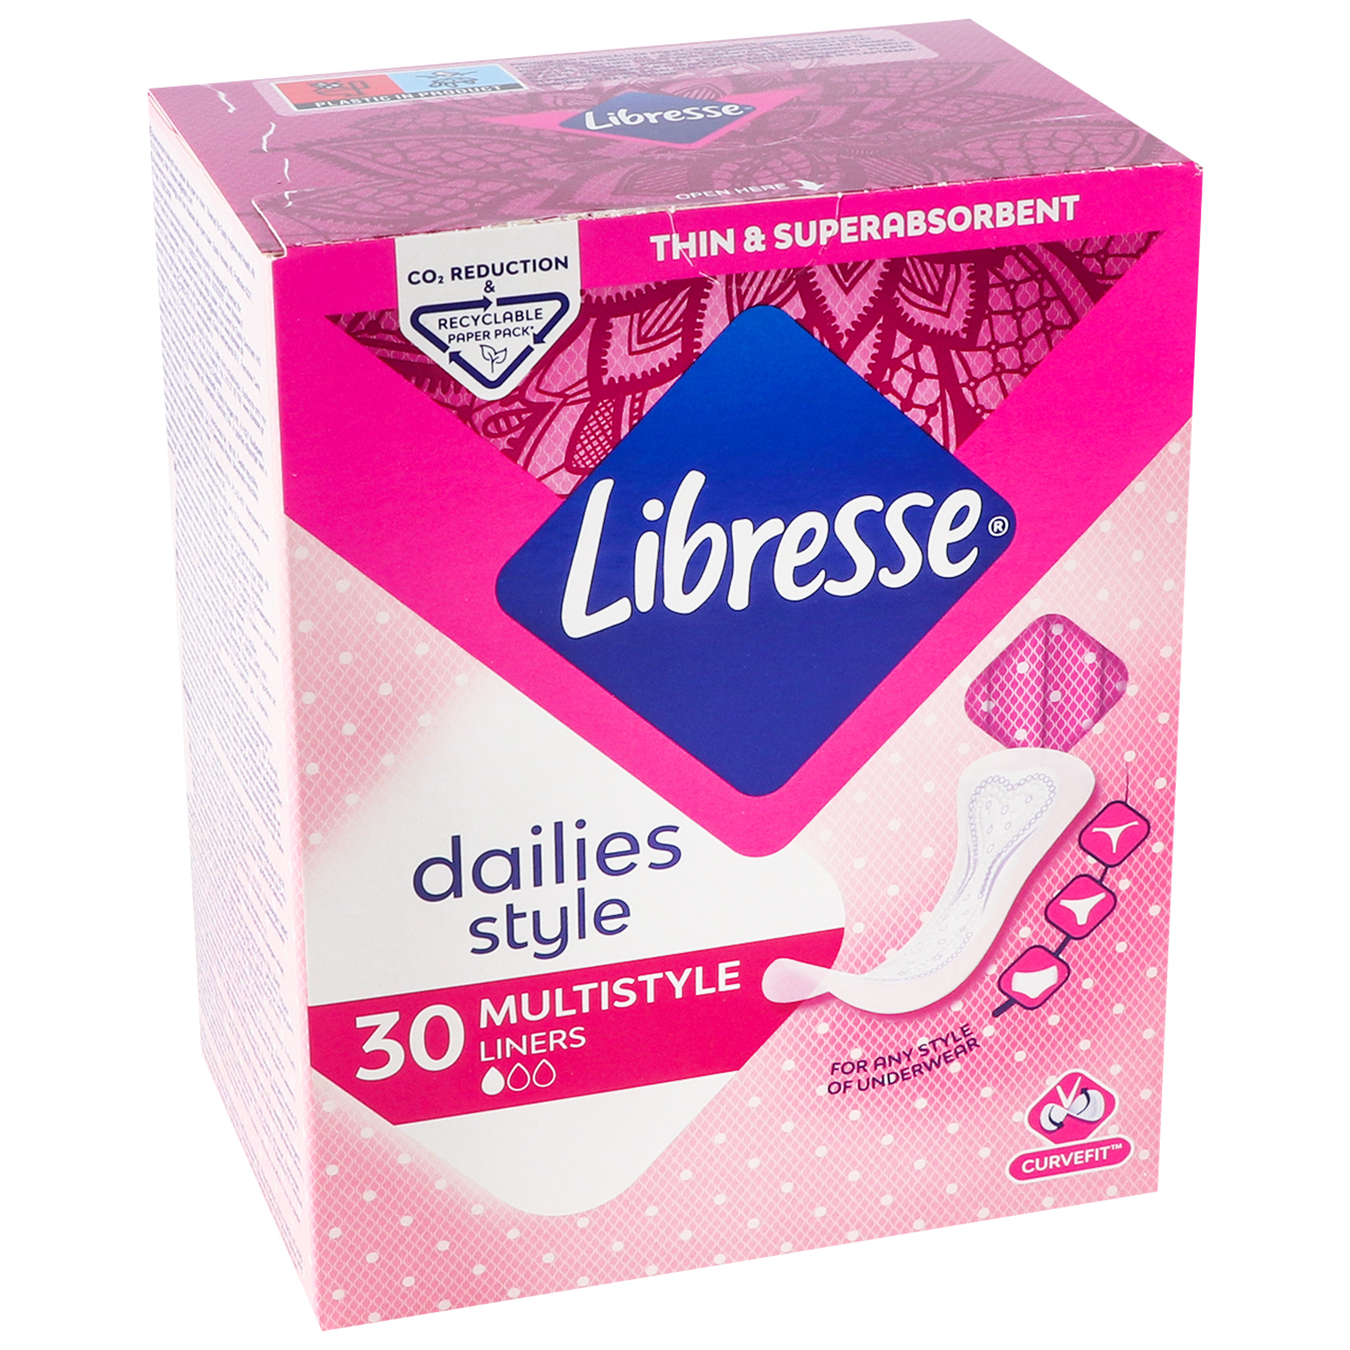 Libresse Daily Fresh Plus Multistyle hygienic pads 30pcs 2